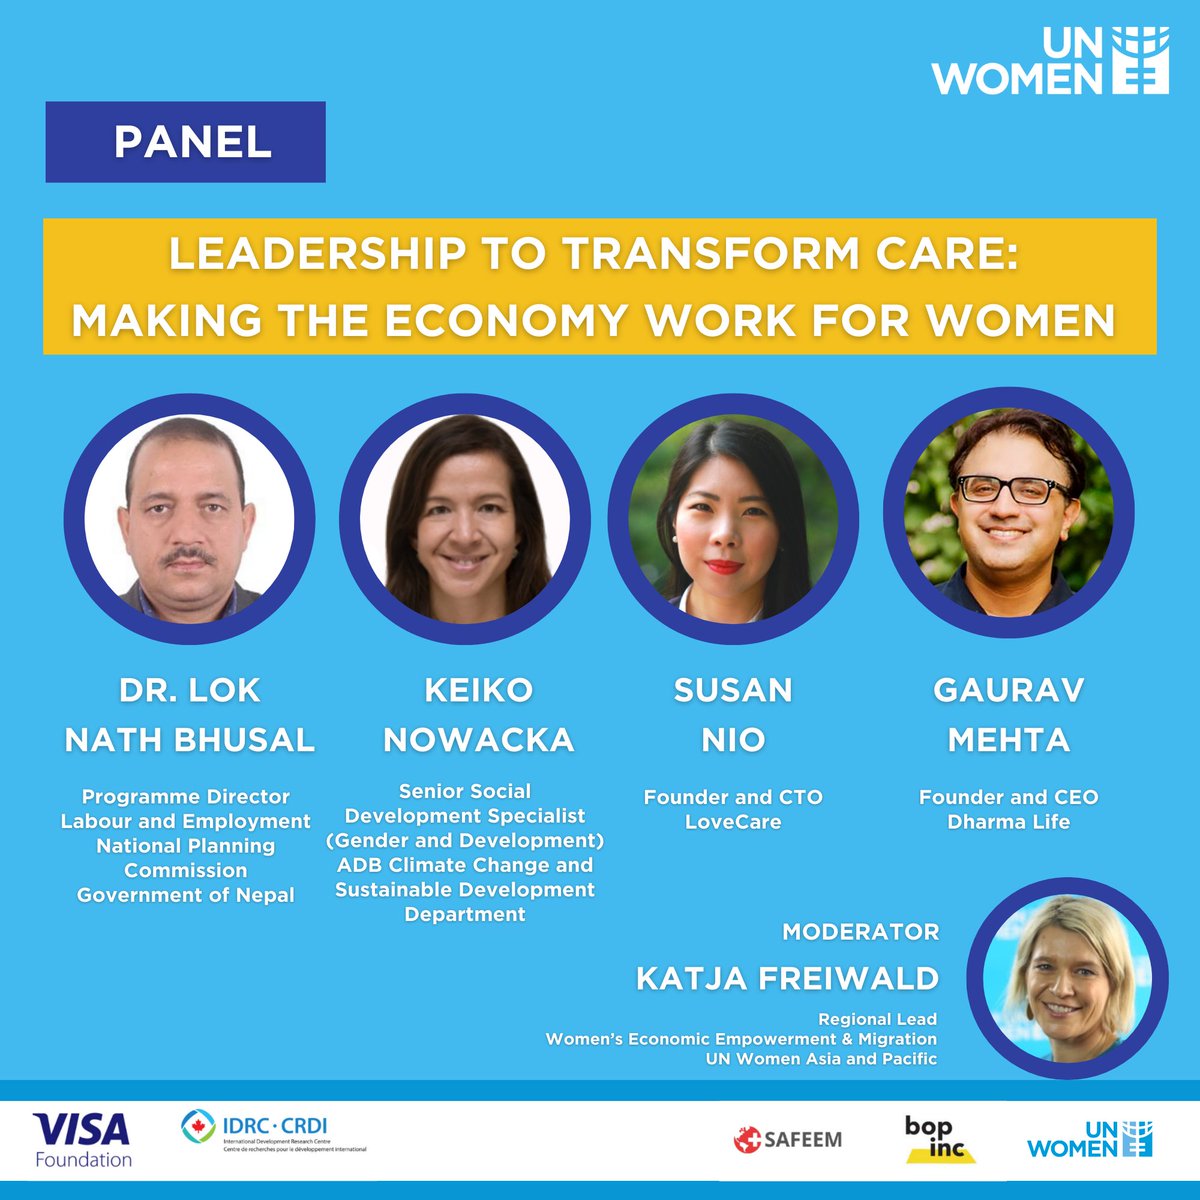 Our panel ‘Leadership to transform care: Making the economy work for women’ at @ESCAP’s #FeministFinanceForum will gather perspectives from panelists leading efforts to transform the care economy in Asia-Pacific.

Stay tuned for updates! 

#Care4WEE #careeconomy